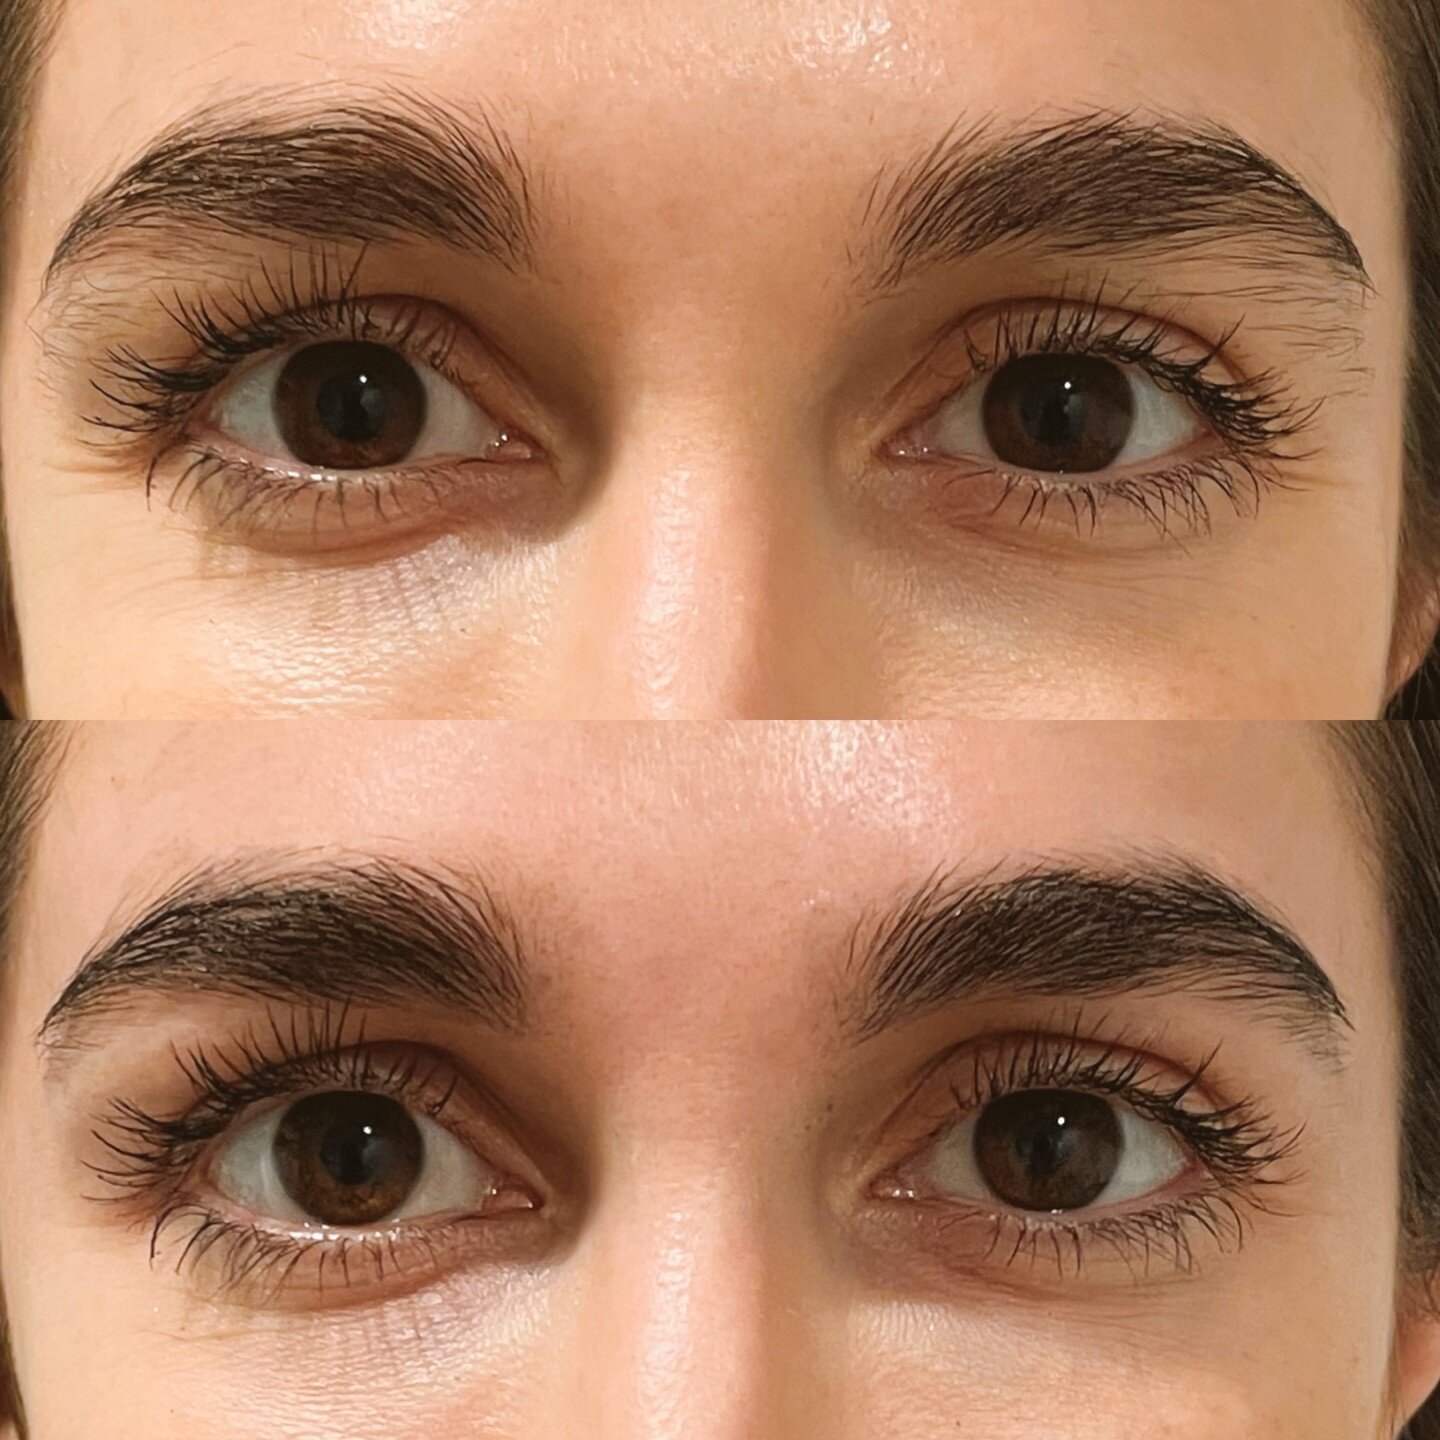 We want to help bring out the best side of you. Your brows are a part of that and usually only needs a little TCL to get them on the right track. We can't wait to have you in our chair! 🧡

#instabrows #naturalbrows #boldbrows #browshape #fluffybrows